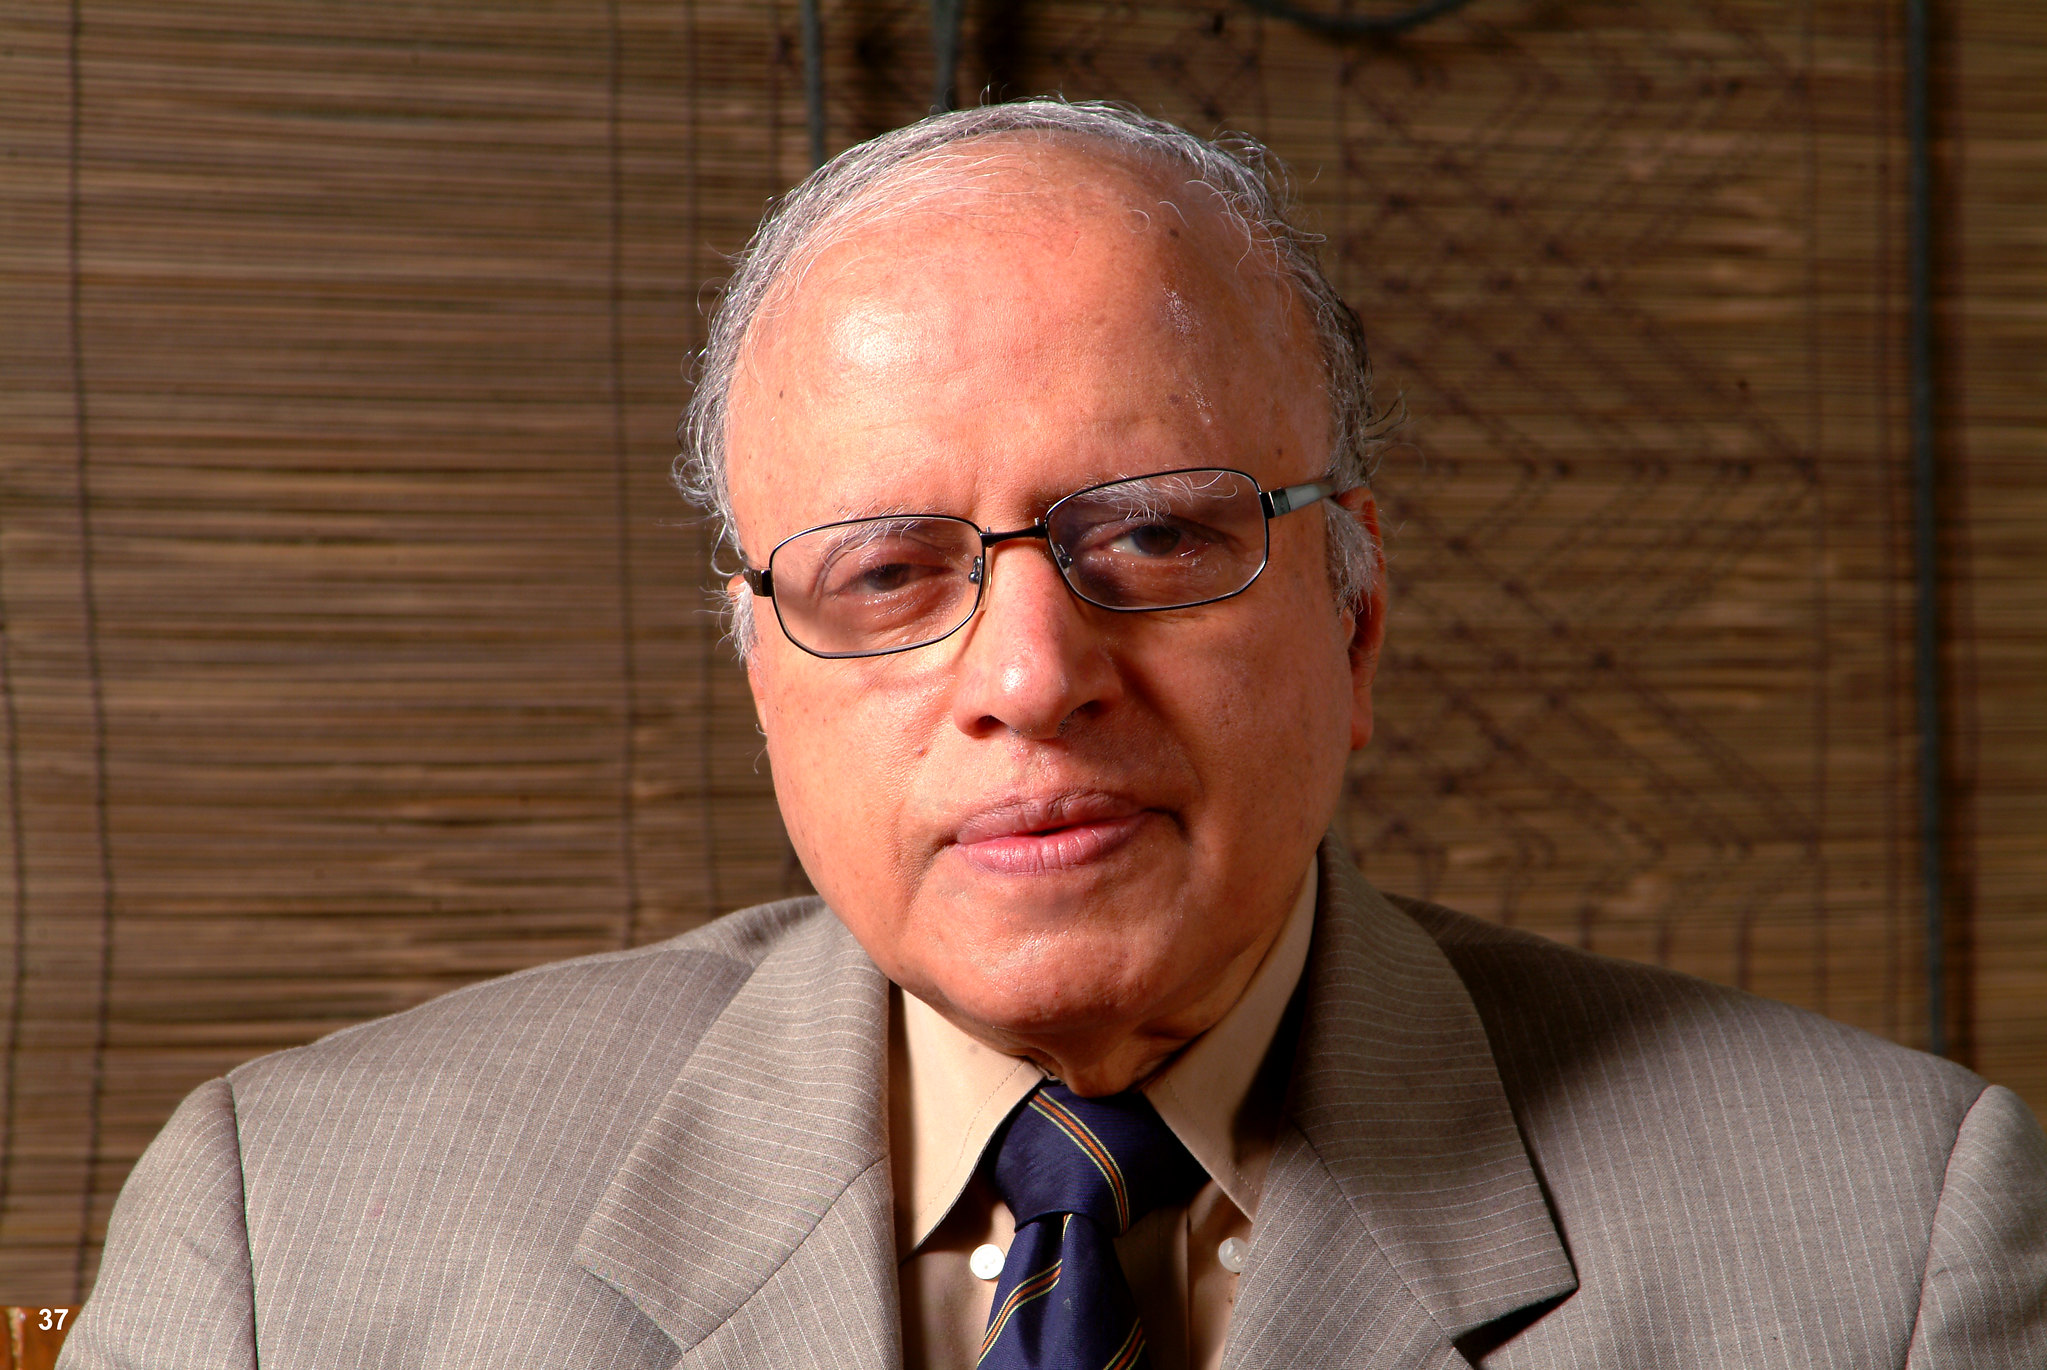 Farewell to the “Father of the Green Revolution in India”, M.S. Swaminathan  – CIMMYT